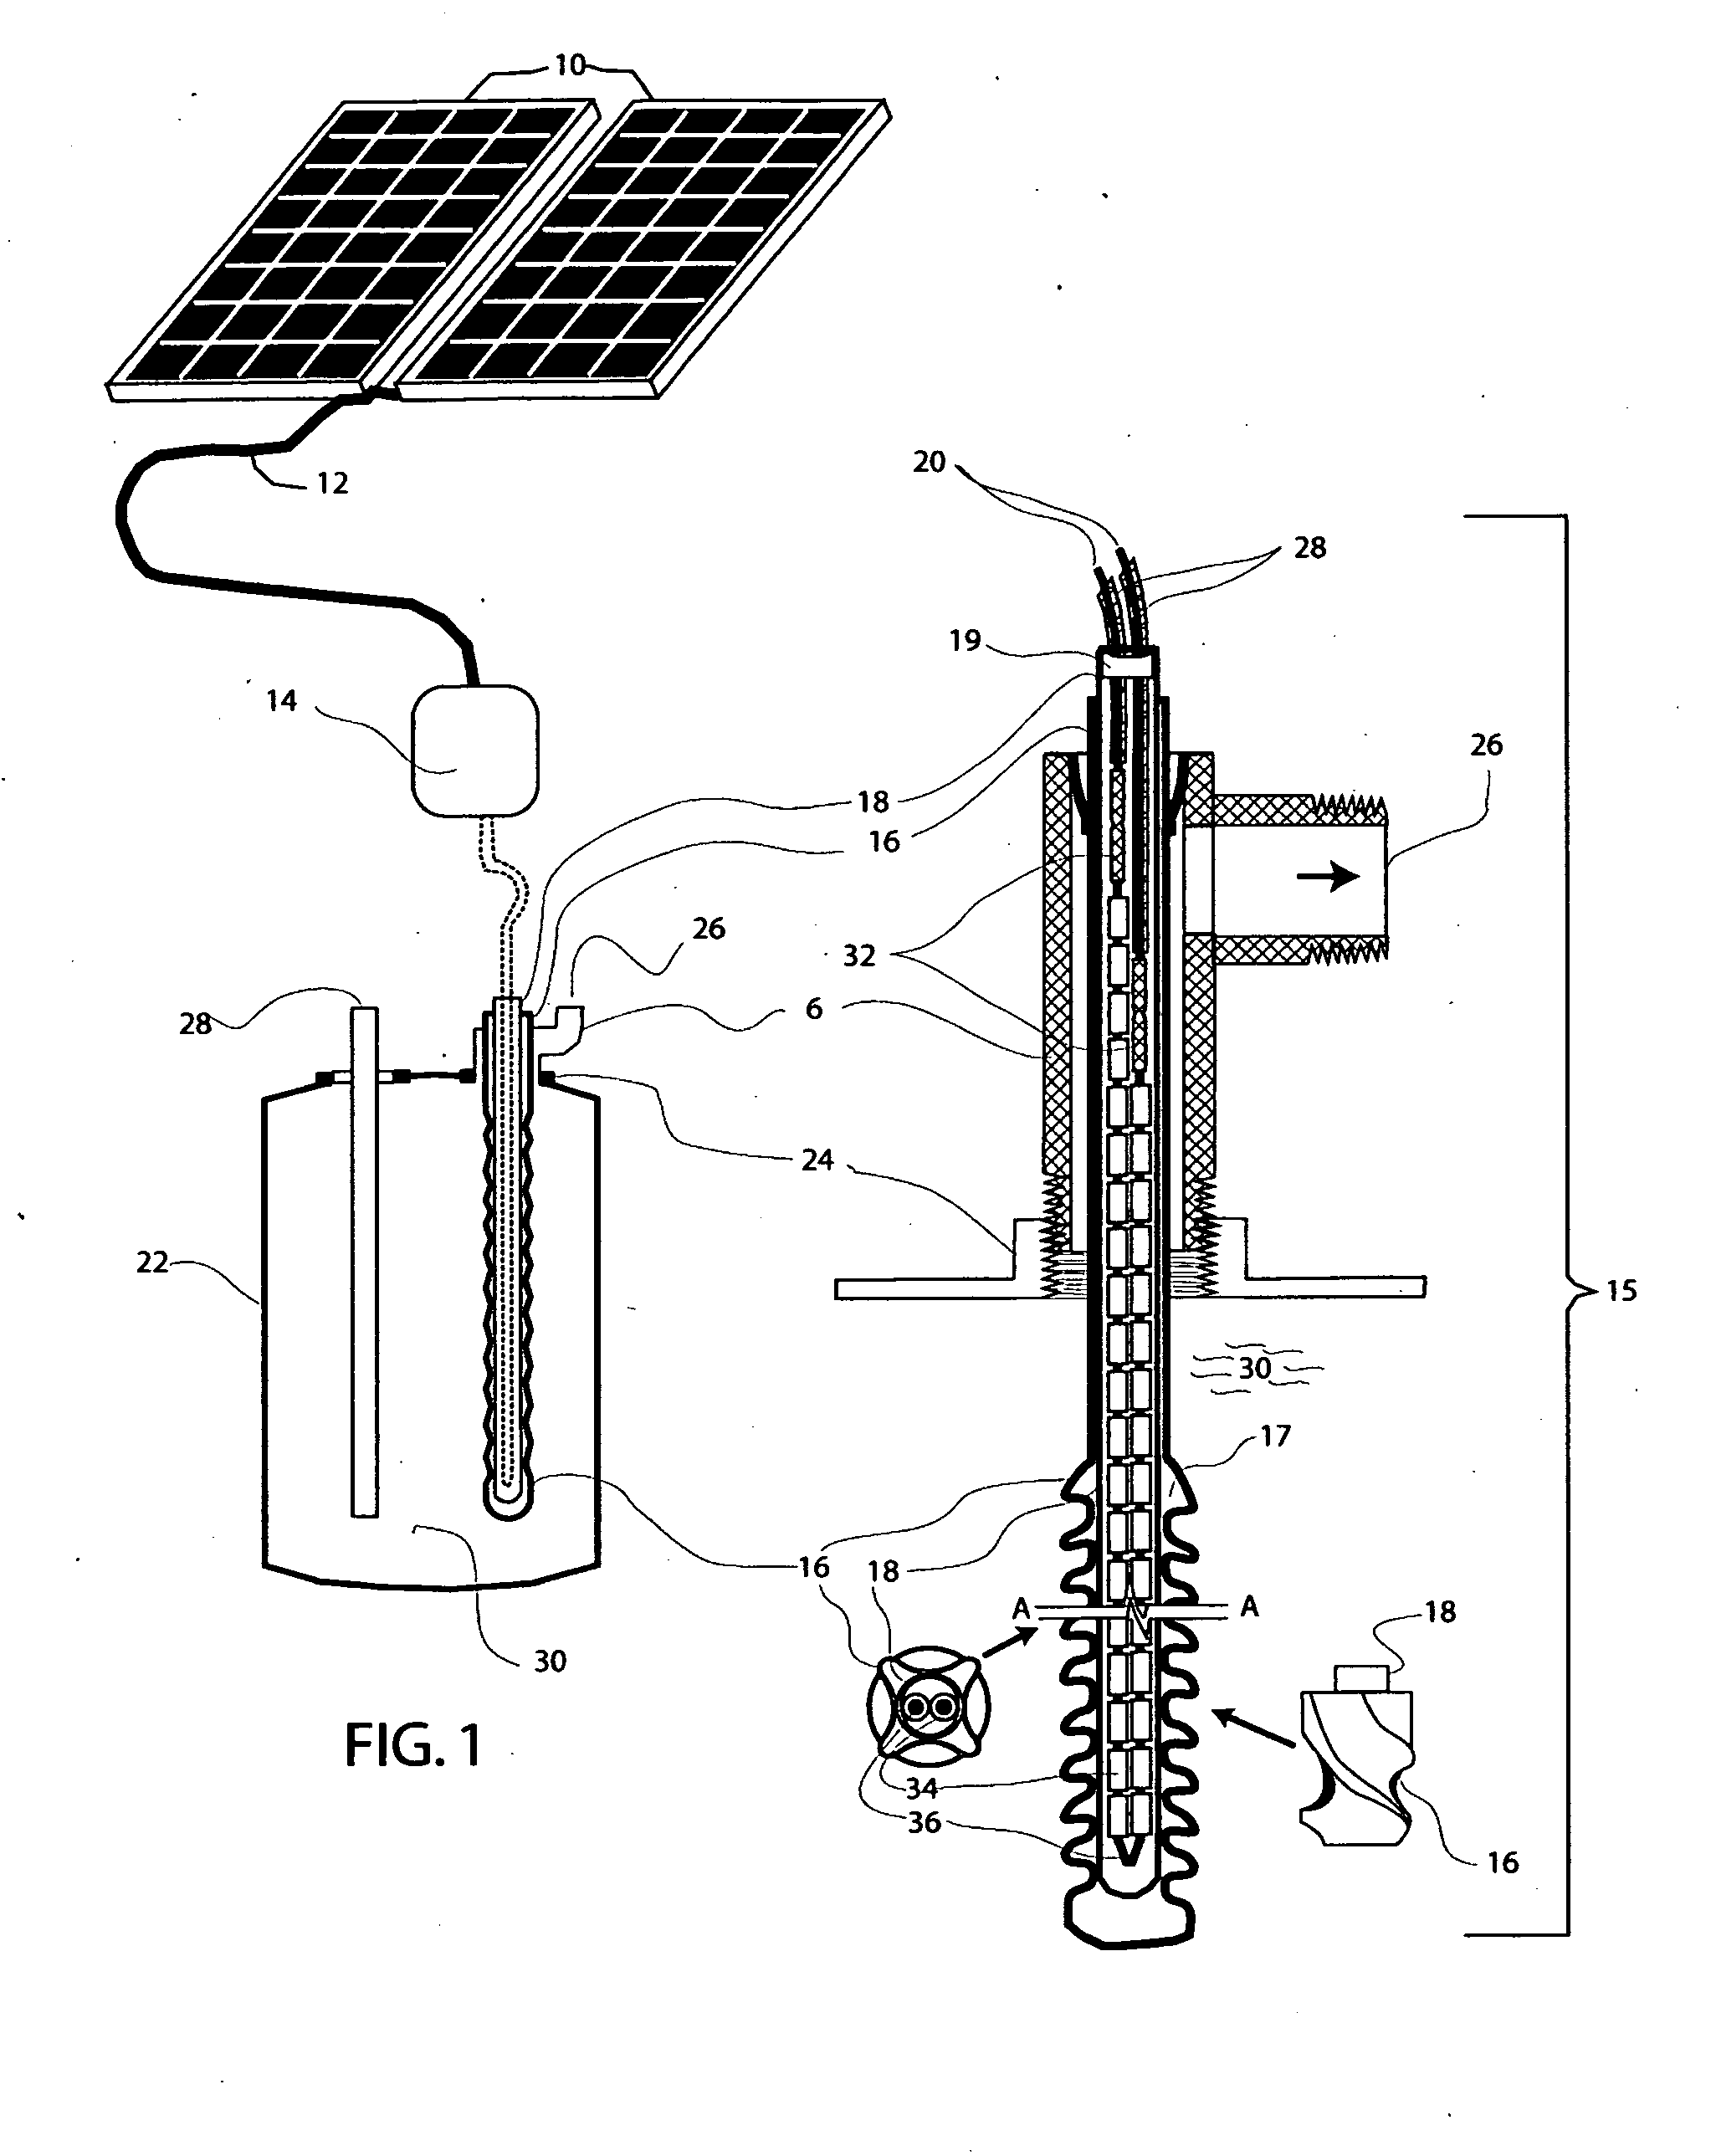 Photovoltaic DC heater systems